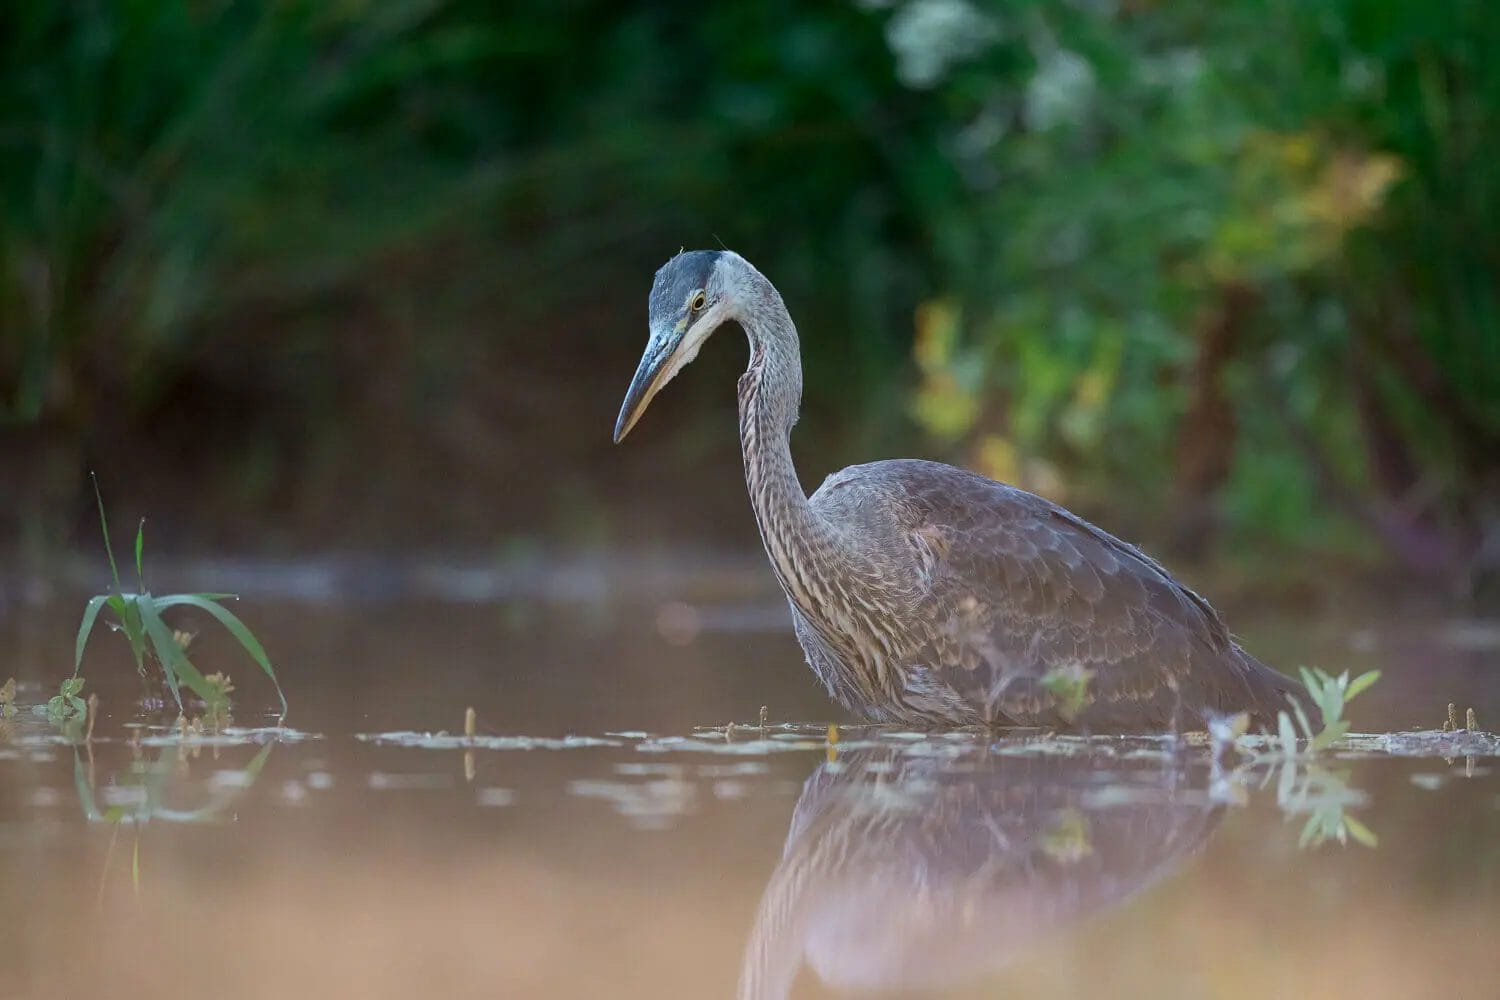 Great blue heron standing in shallow water with a reflection and vegetation in the background.